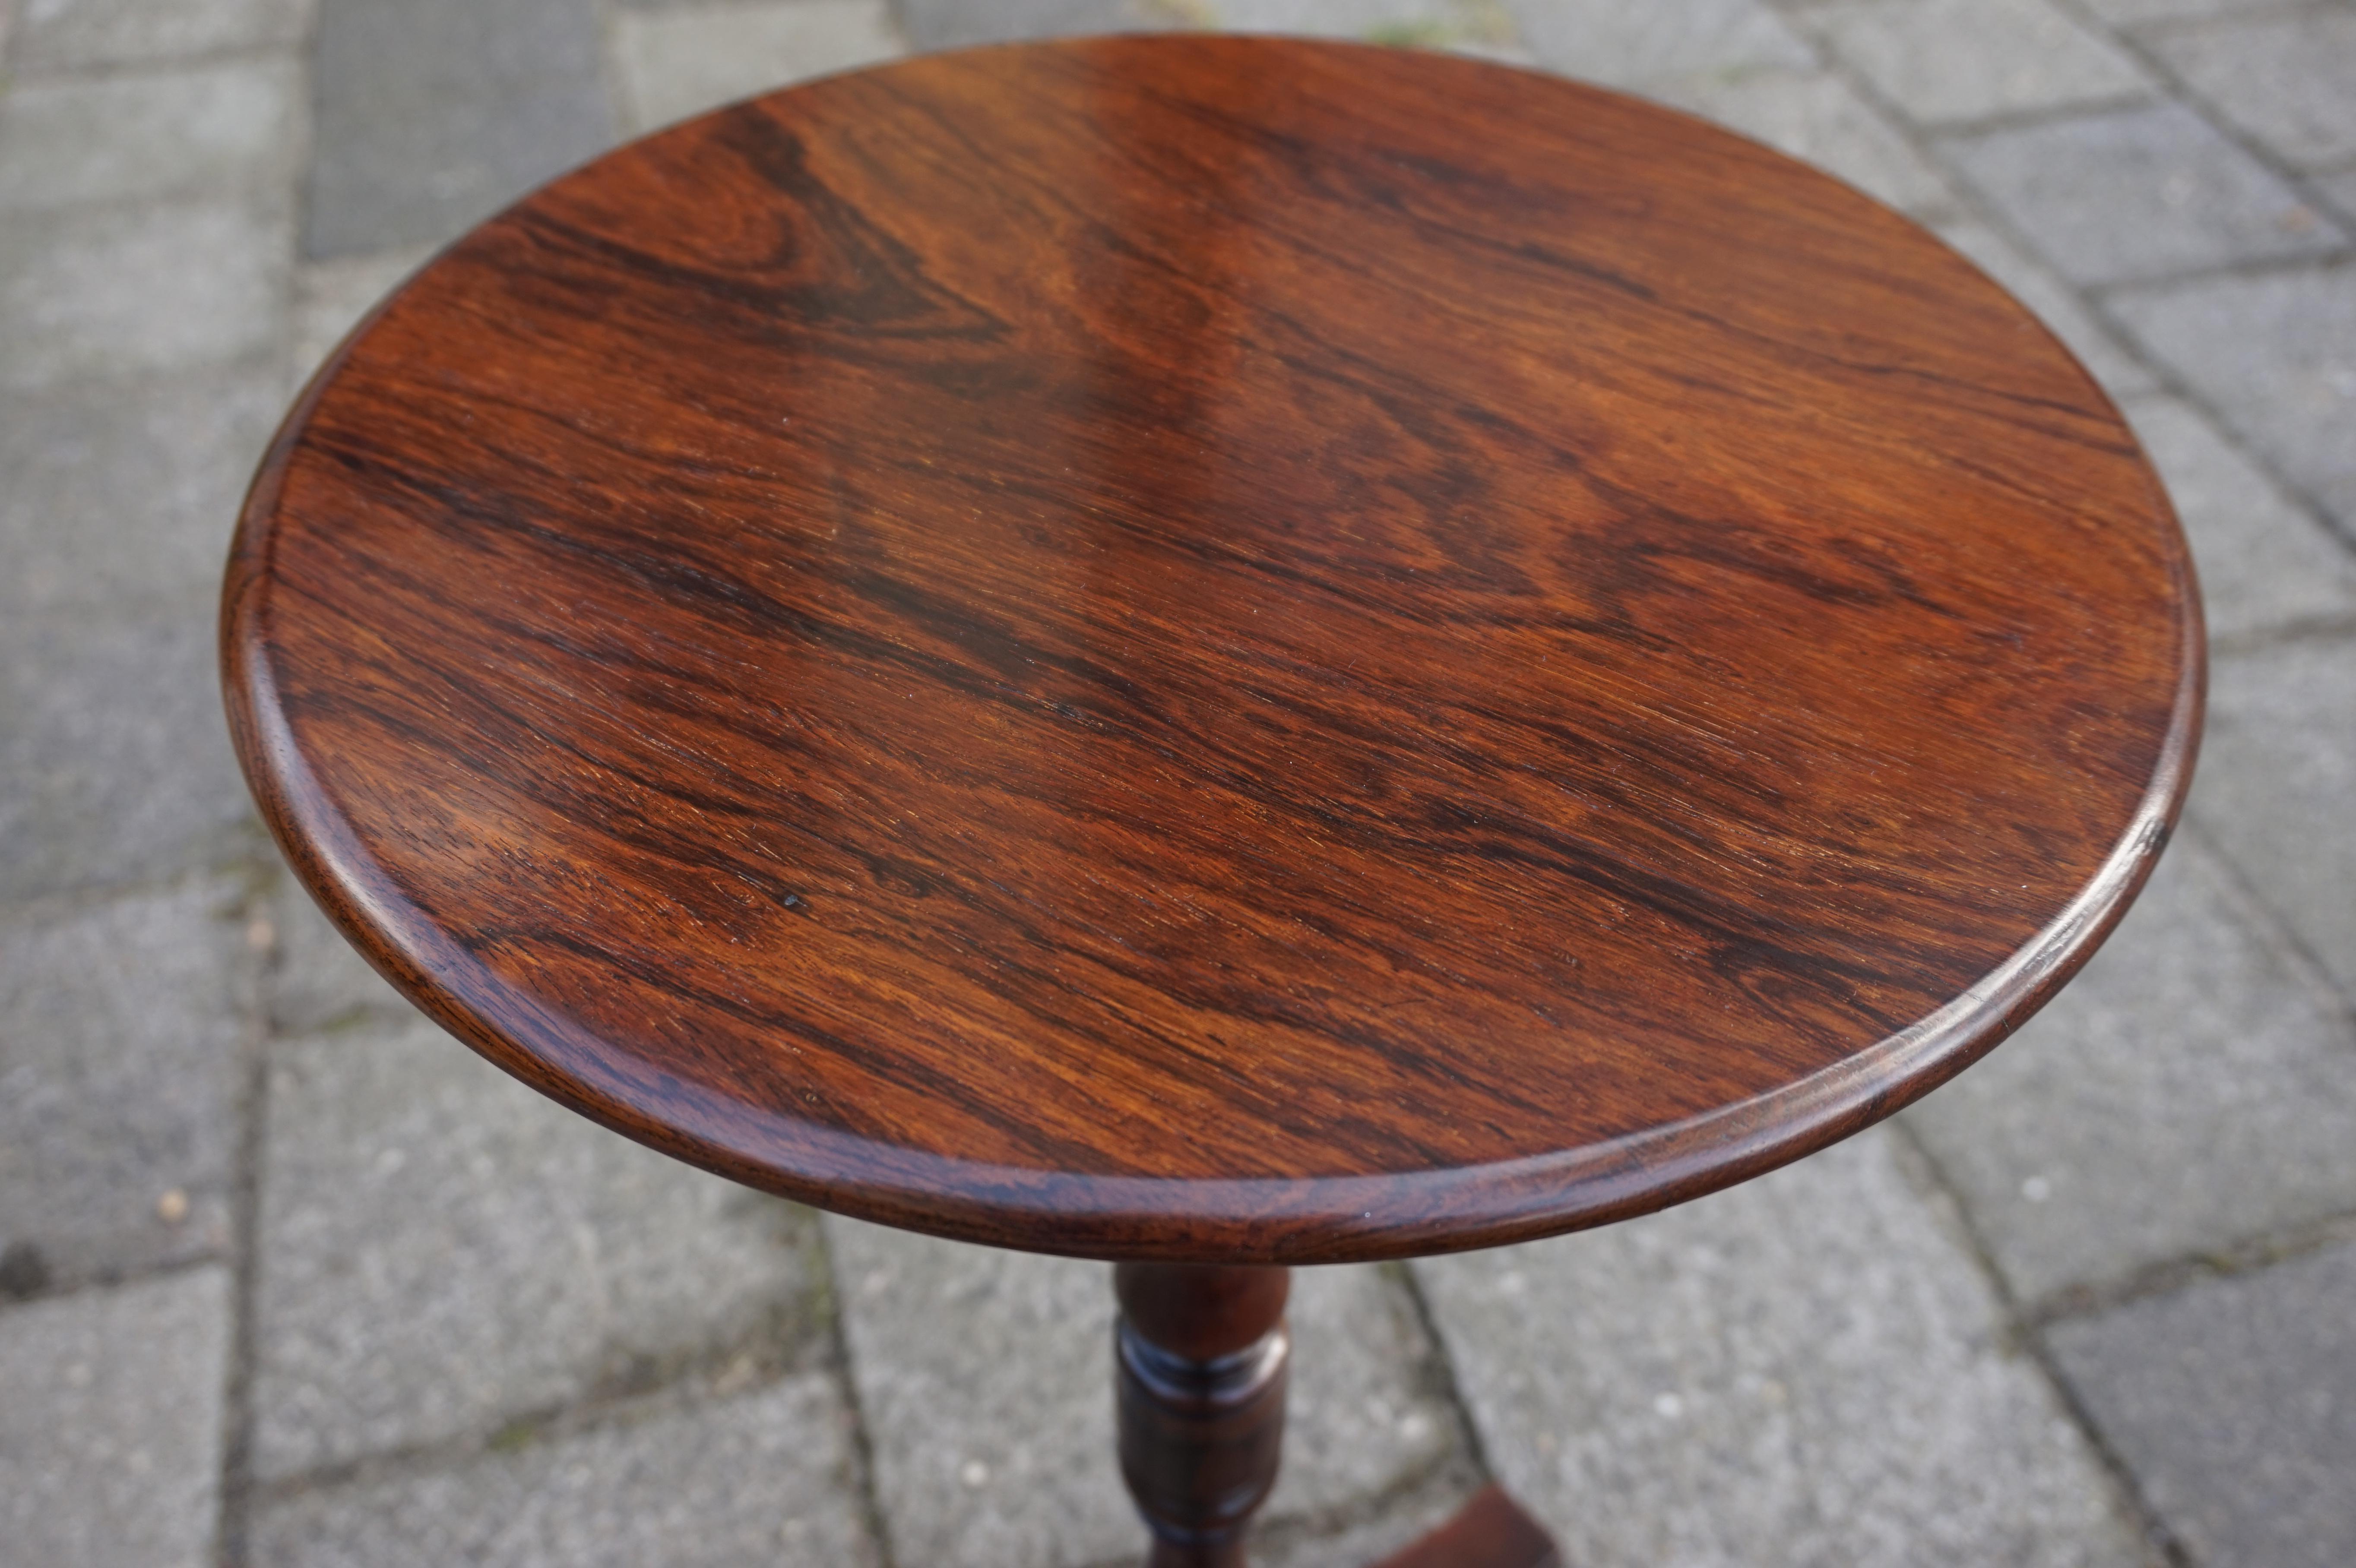 Wood Stunning Early 1800s Georgian Tripod Wine Table / End Table with Amazing Patina